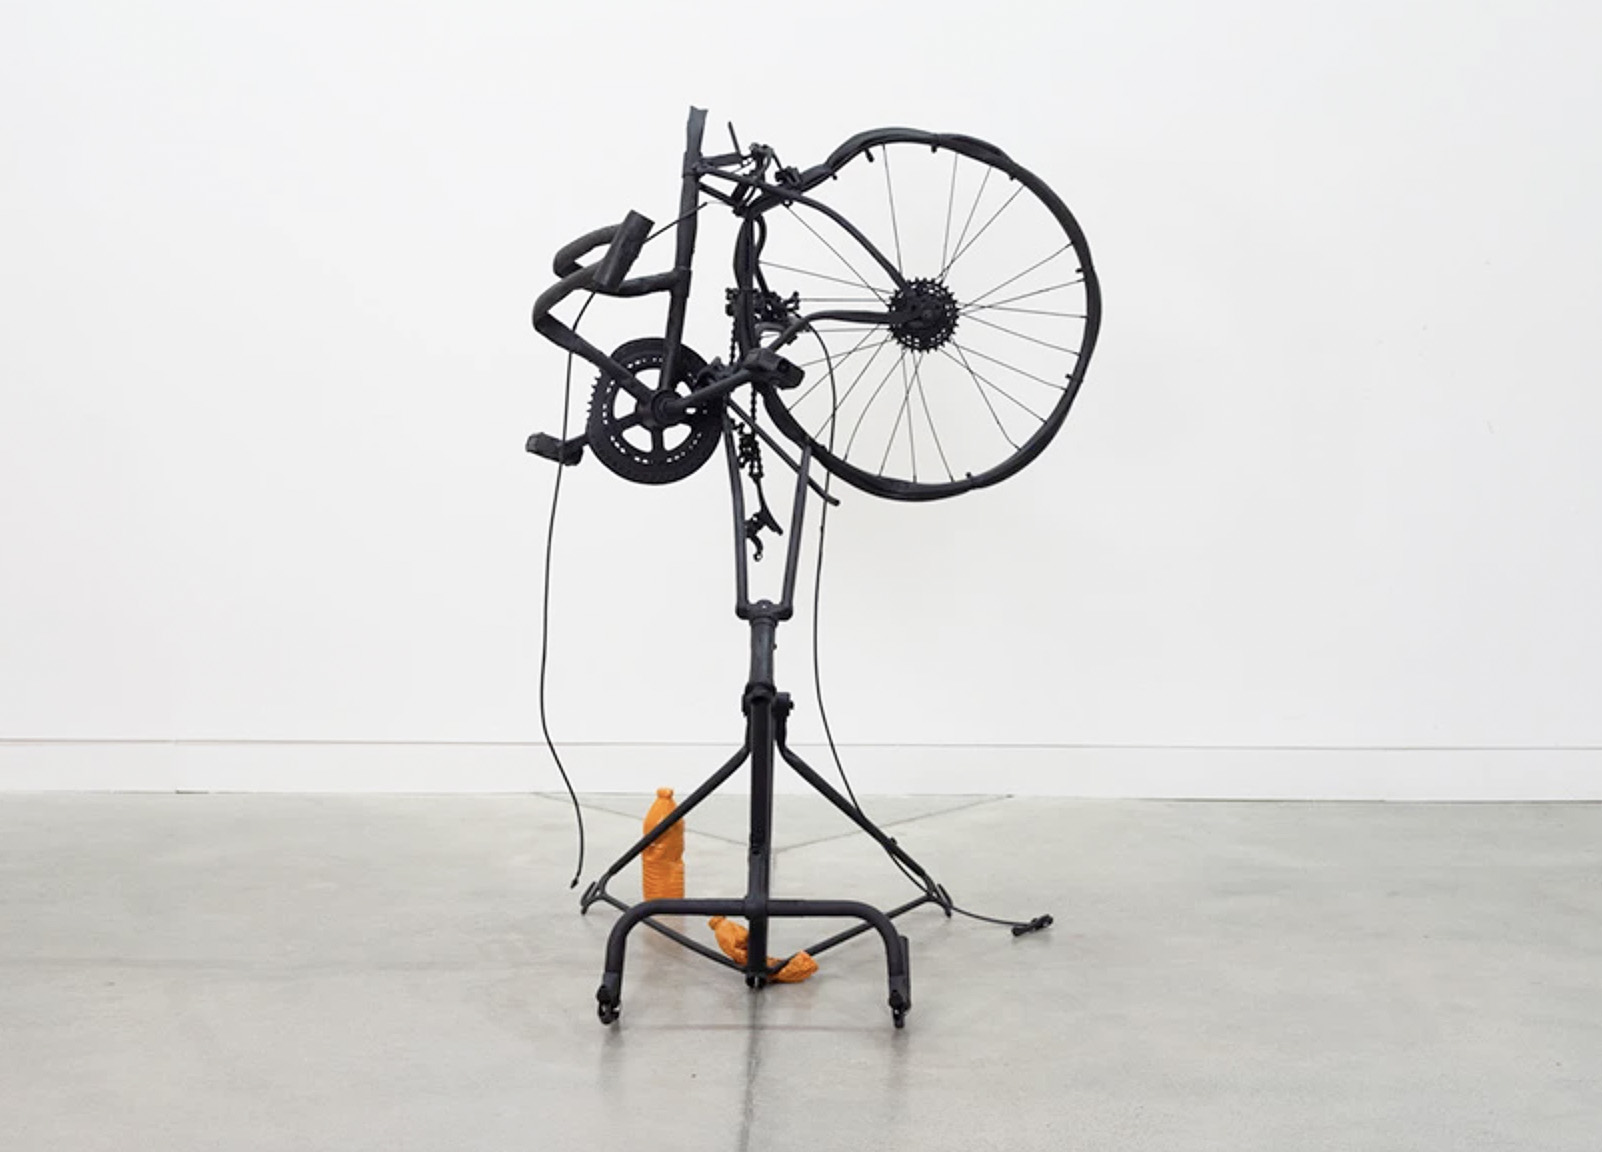 sculpture made out of a bicycle